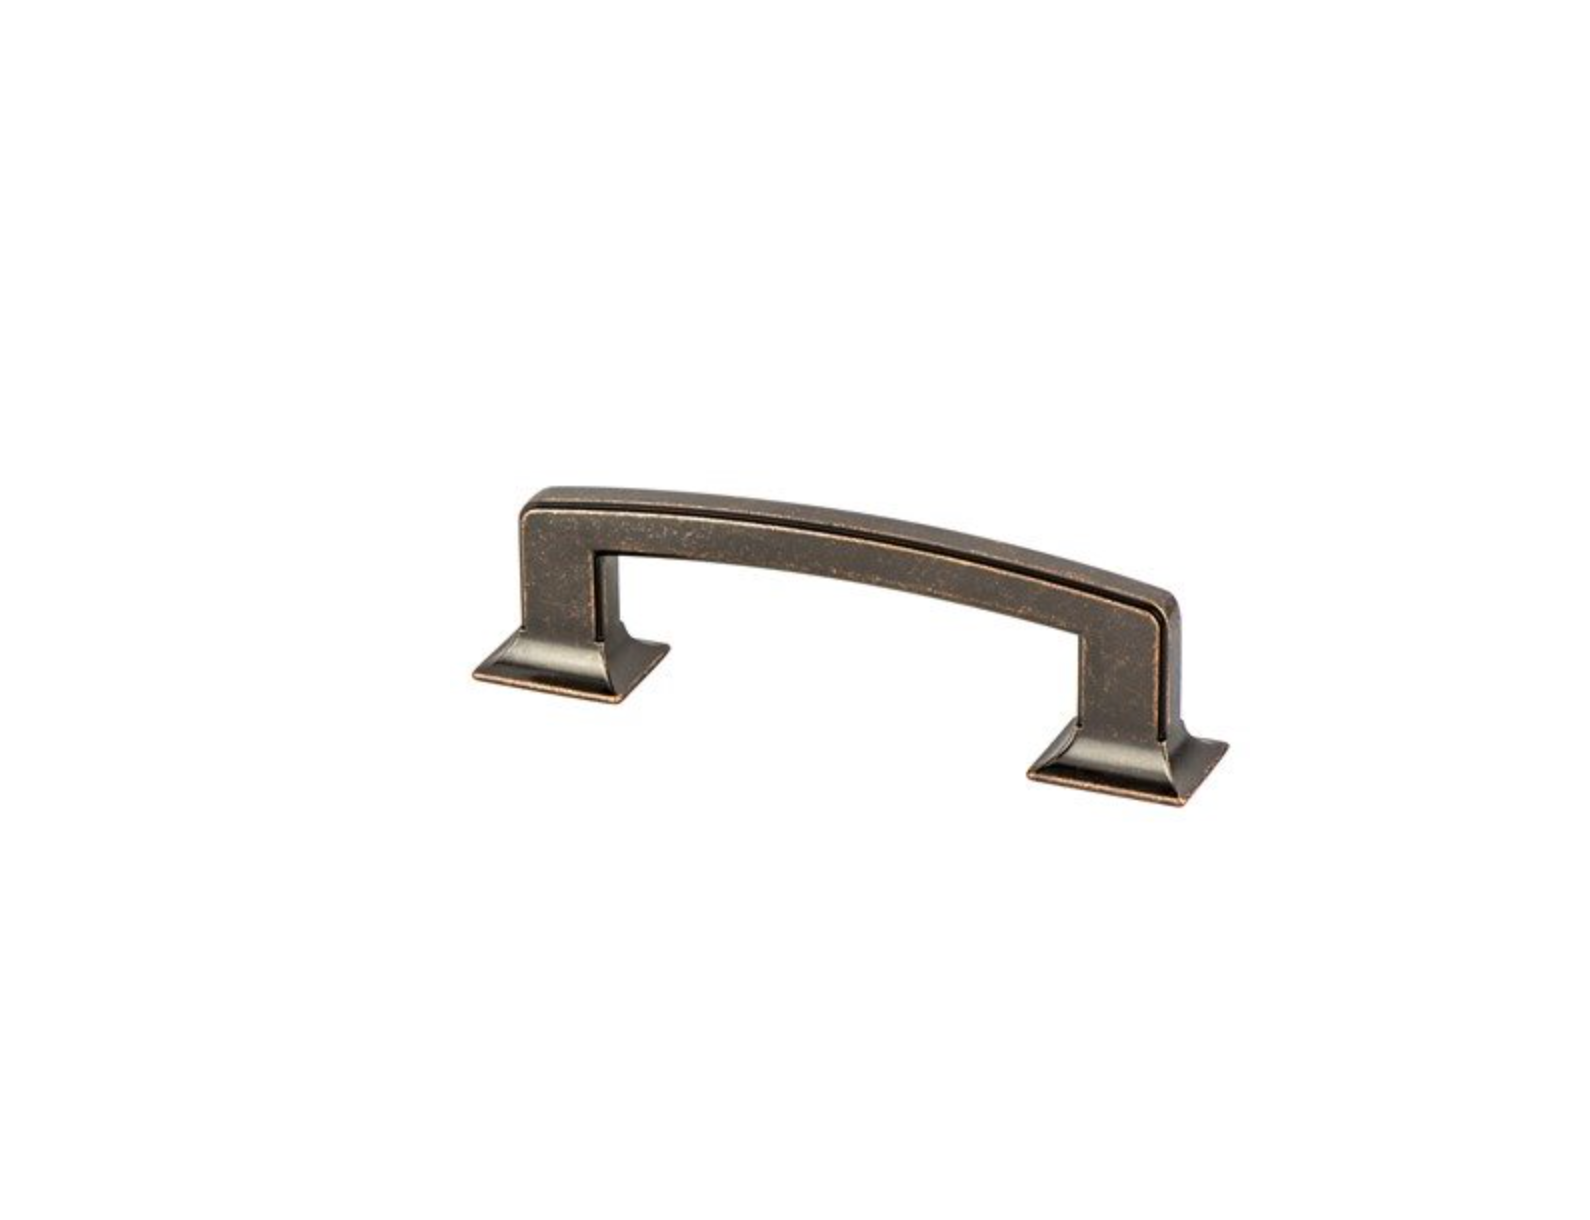 Distressed Bronze "Liana" Drawer Pulls and Knobs for Cabinets and Furniture - Industry Hardware